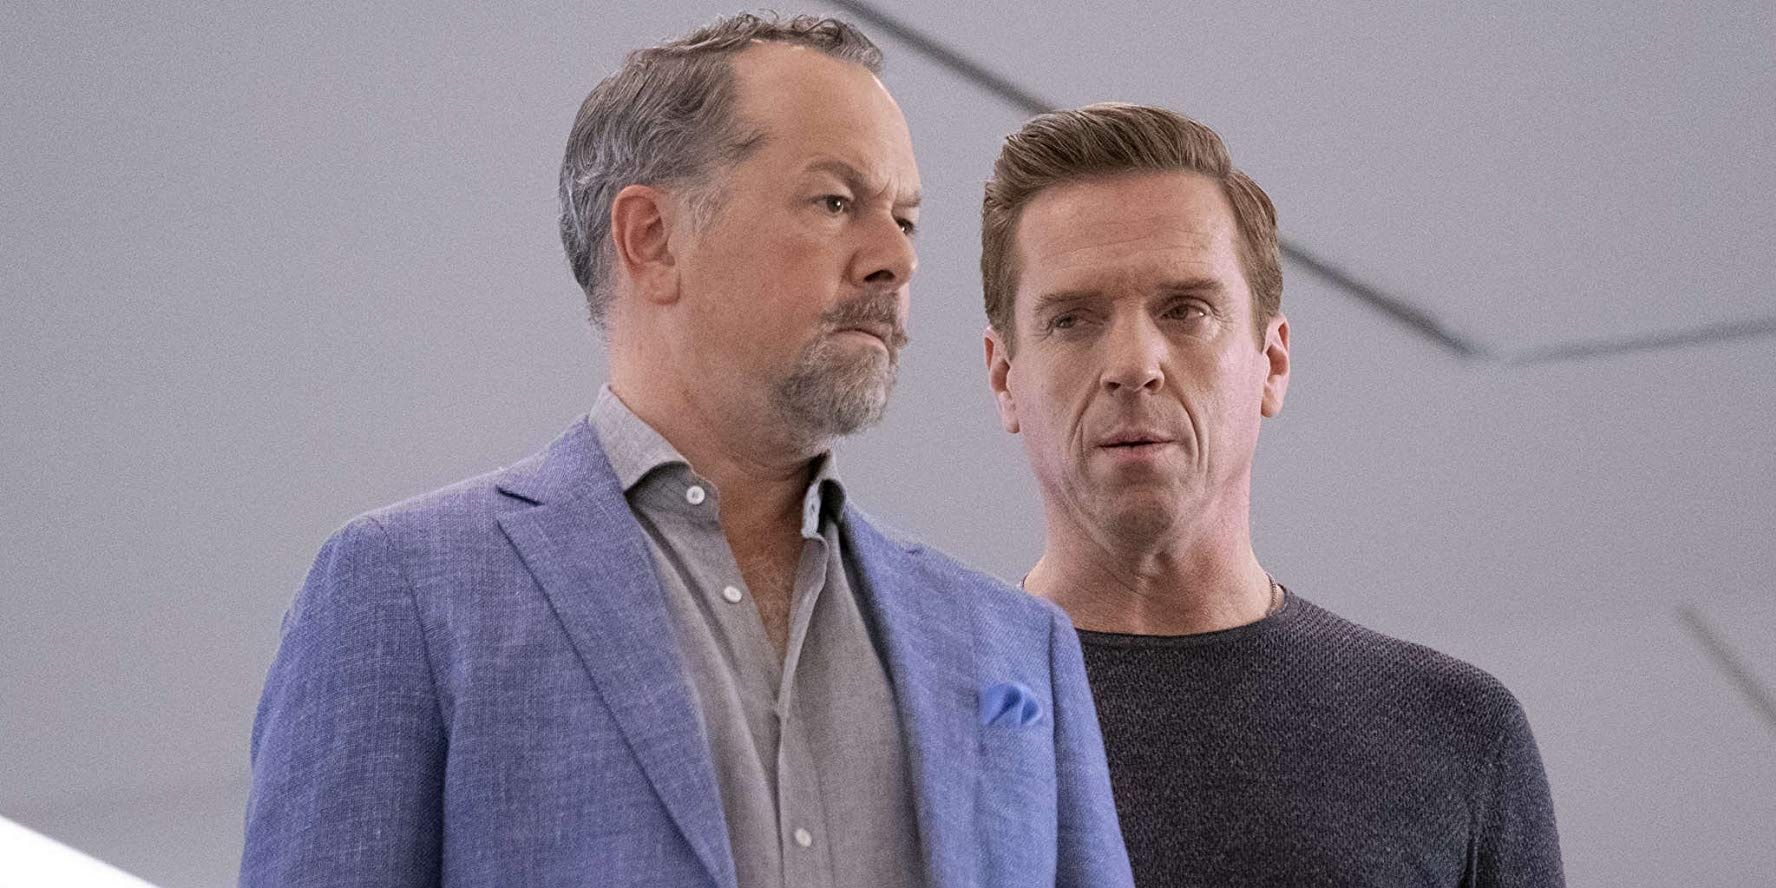 Billions The 10 Smartest Characters Ranked